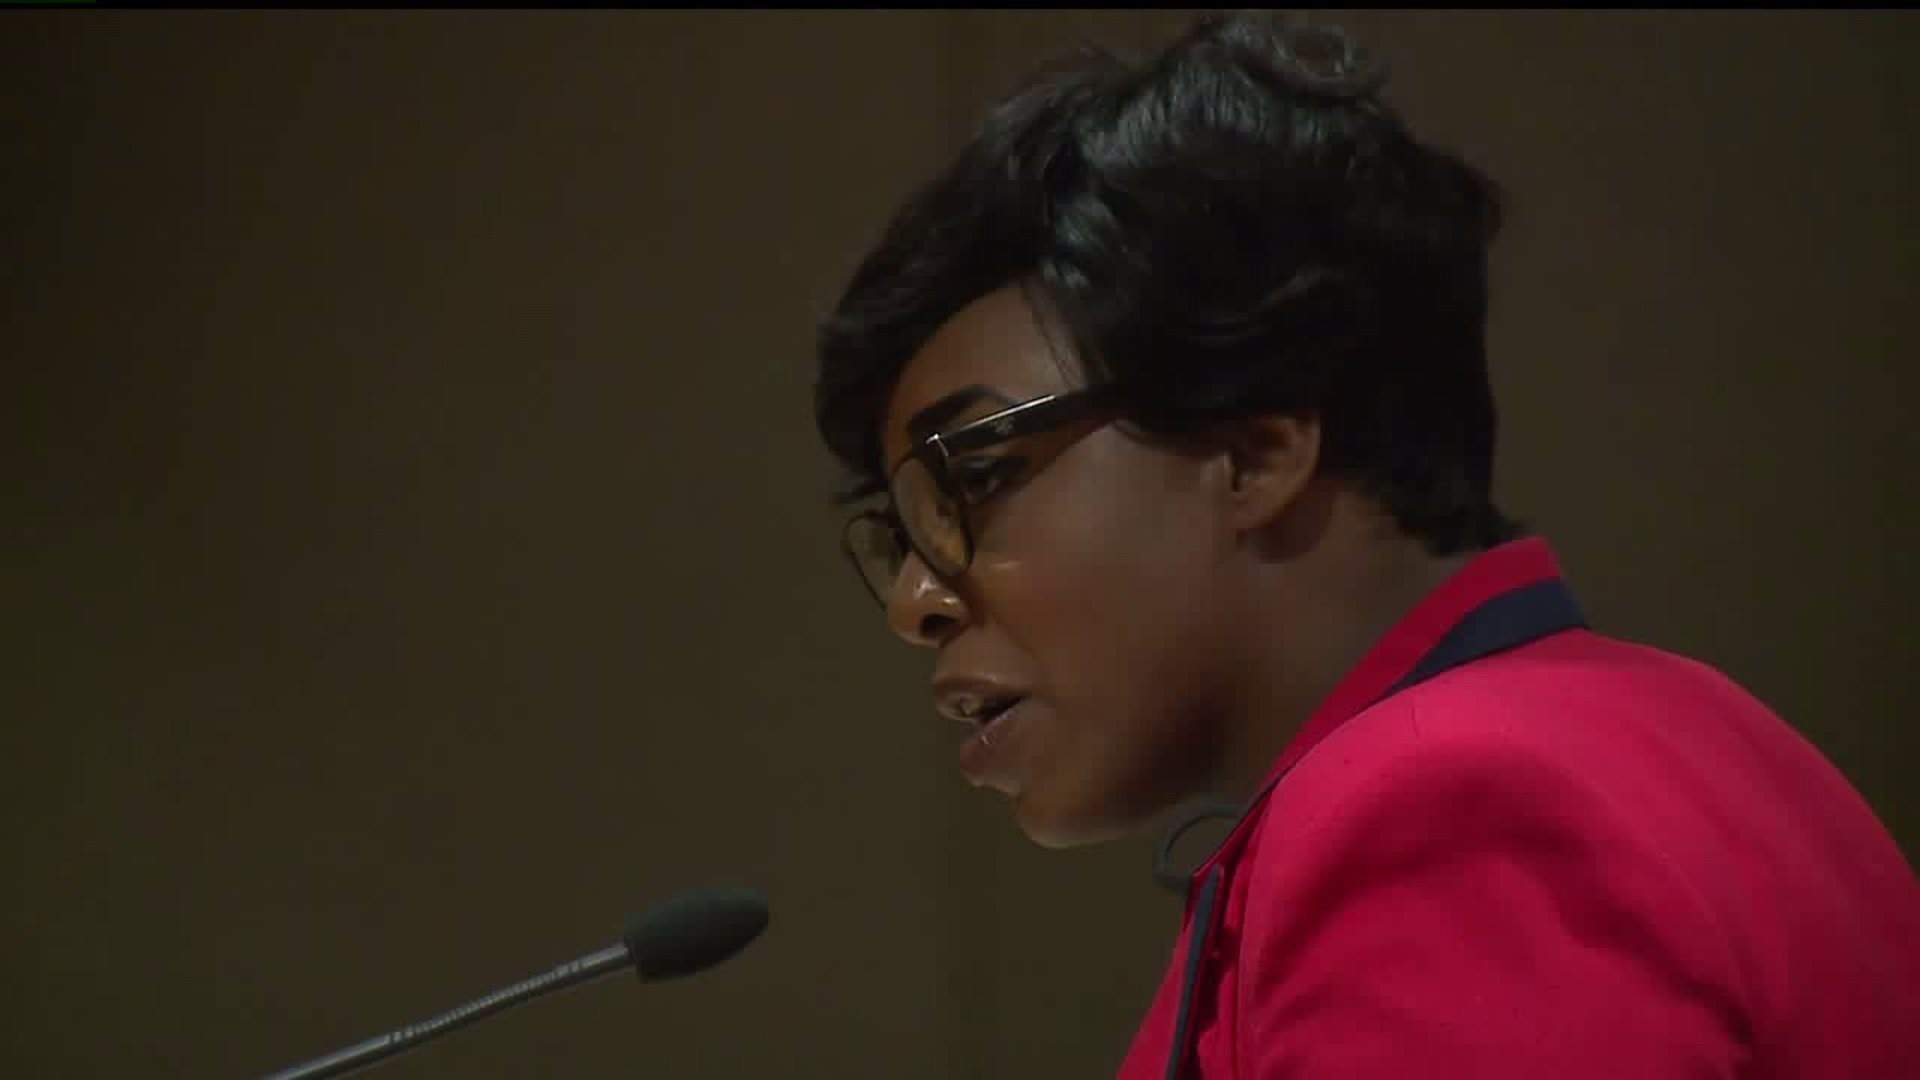 Latrice Lacey files review of dispute with city regarding her lawn